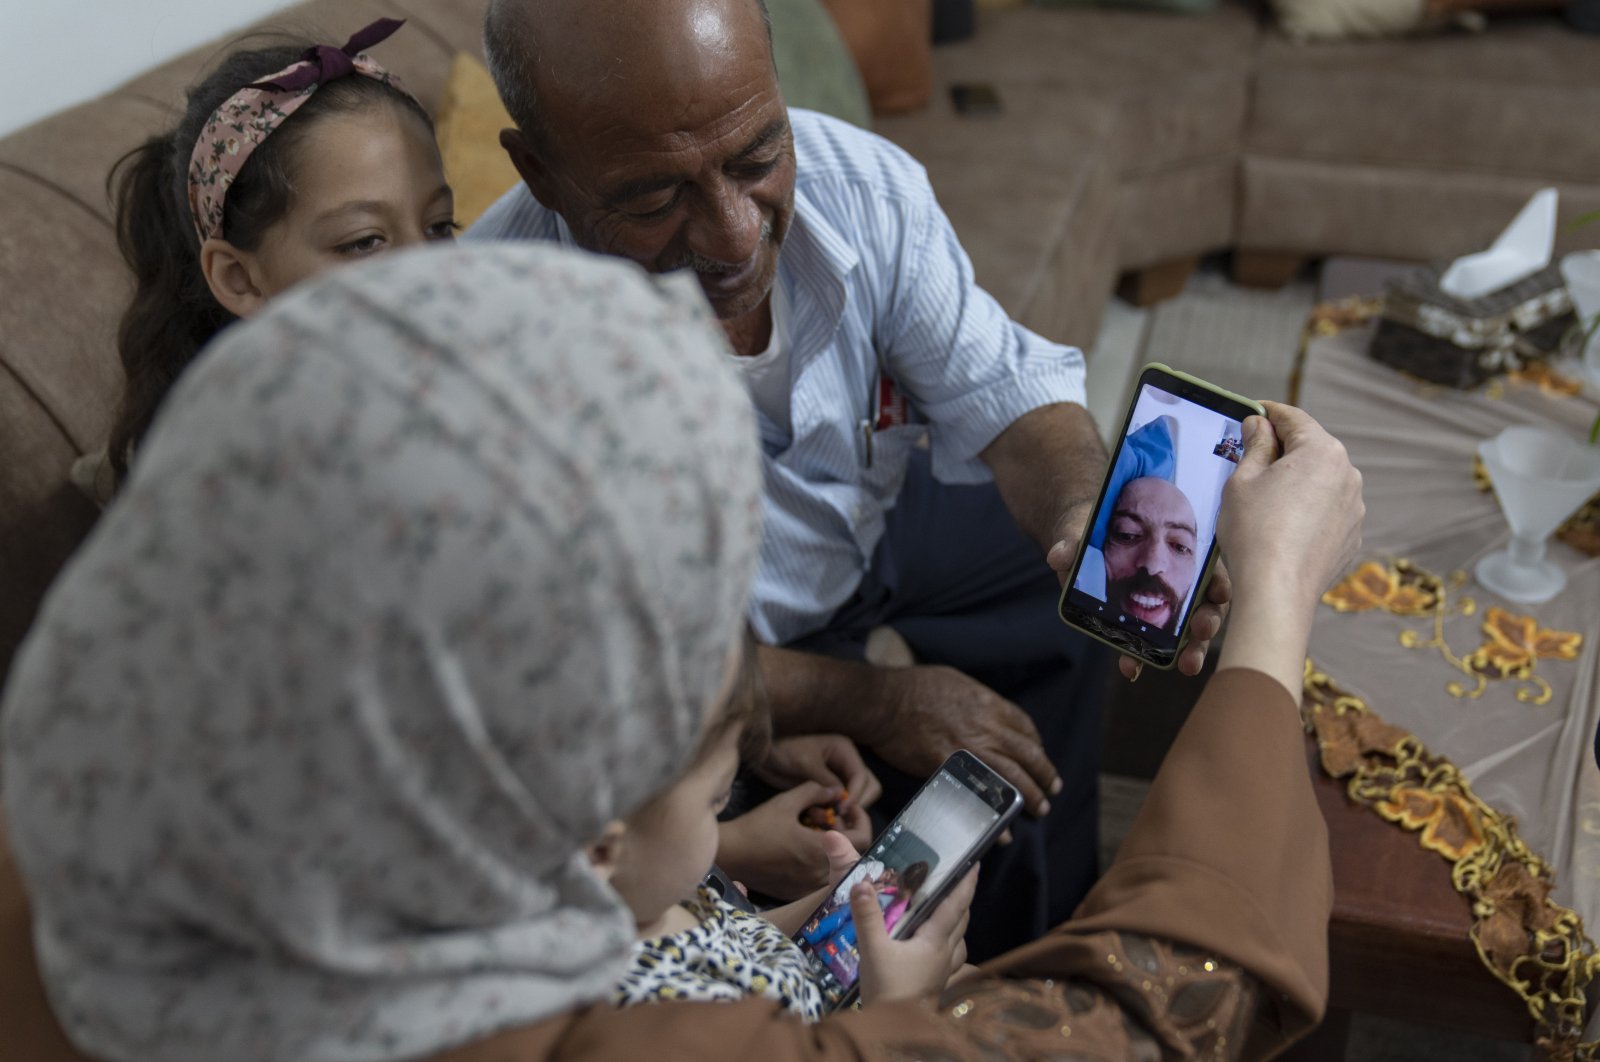 Khalil Awawdeh, a Palestinian detainee in Israel, talks to family members on a video call, at their family house in the West Bank village of Idna, Hebron, Monday, Aug. 22, 2022. (AP Photo)